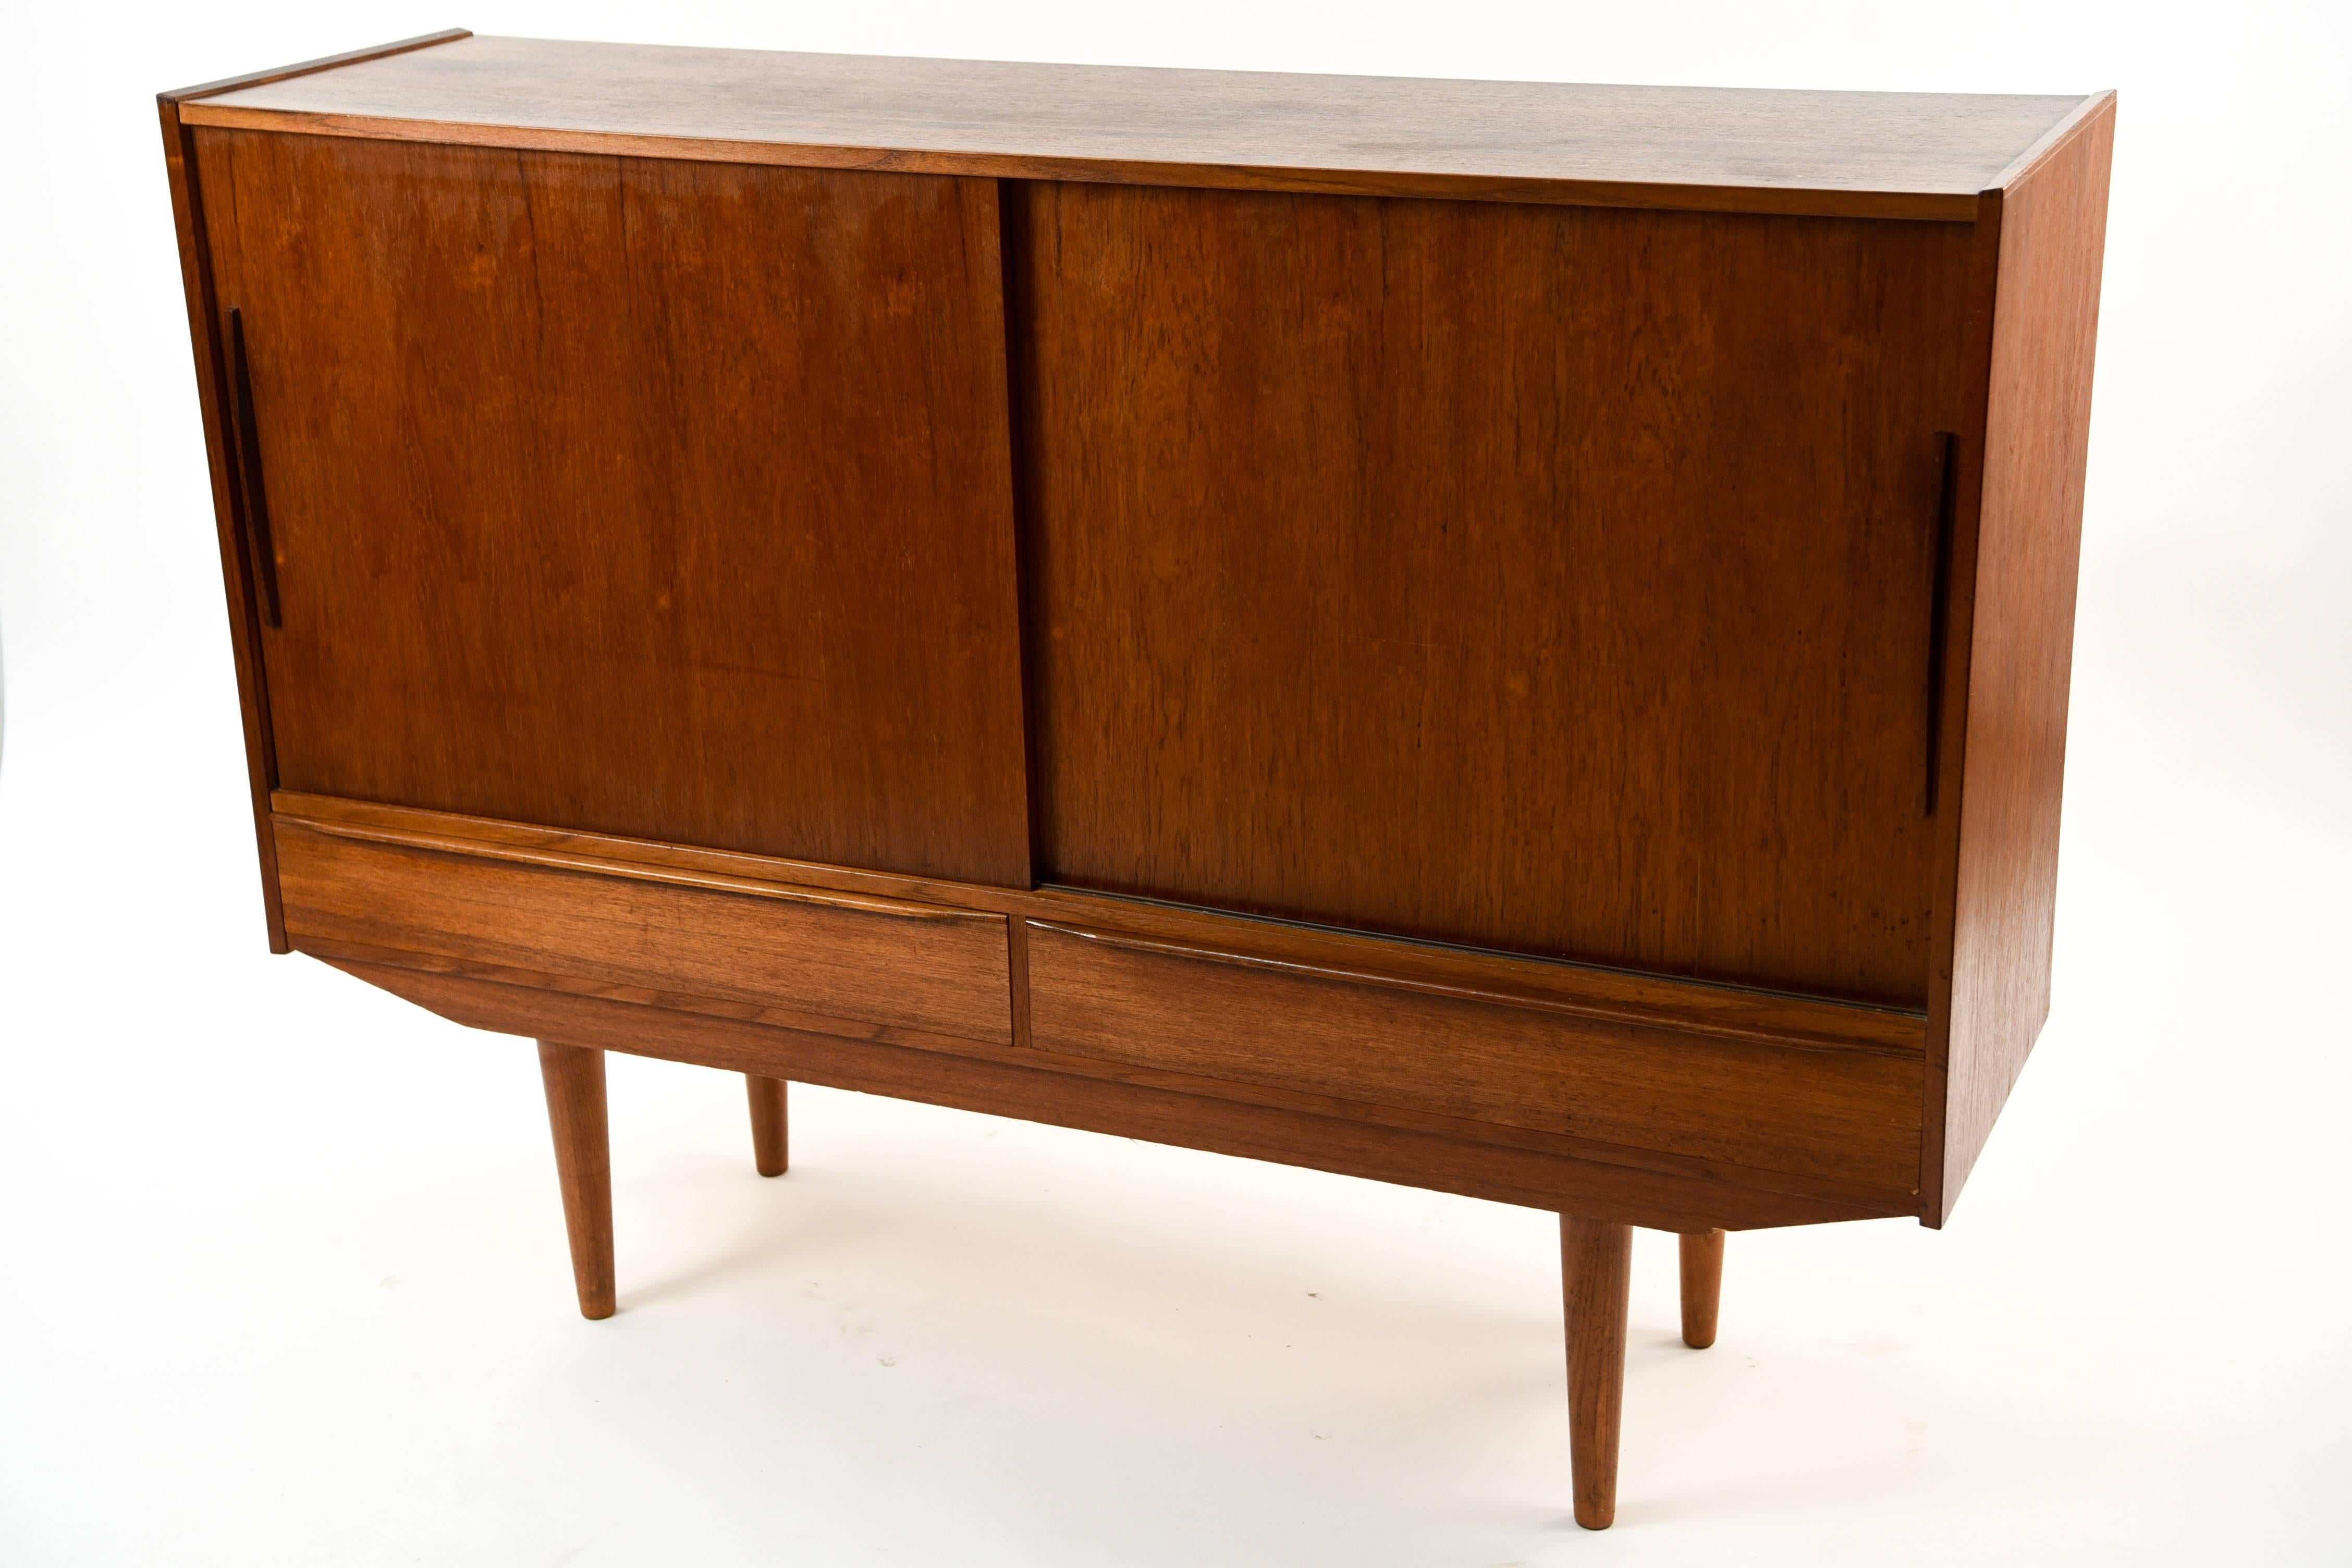 This Danish midcentury teak sideboard has style in every detail. From the handsome appearance of the sliding doors outside, this sideboard opens to reveal sliding drawers and shelves, backed with a fun design on the mirrored surface.